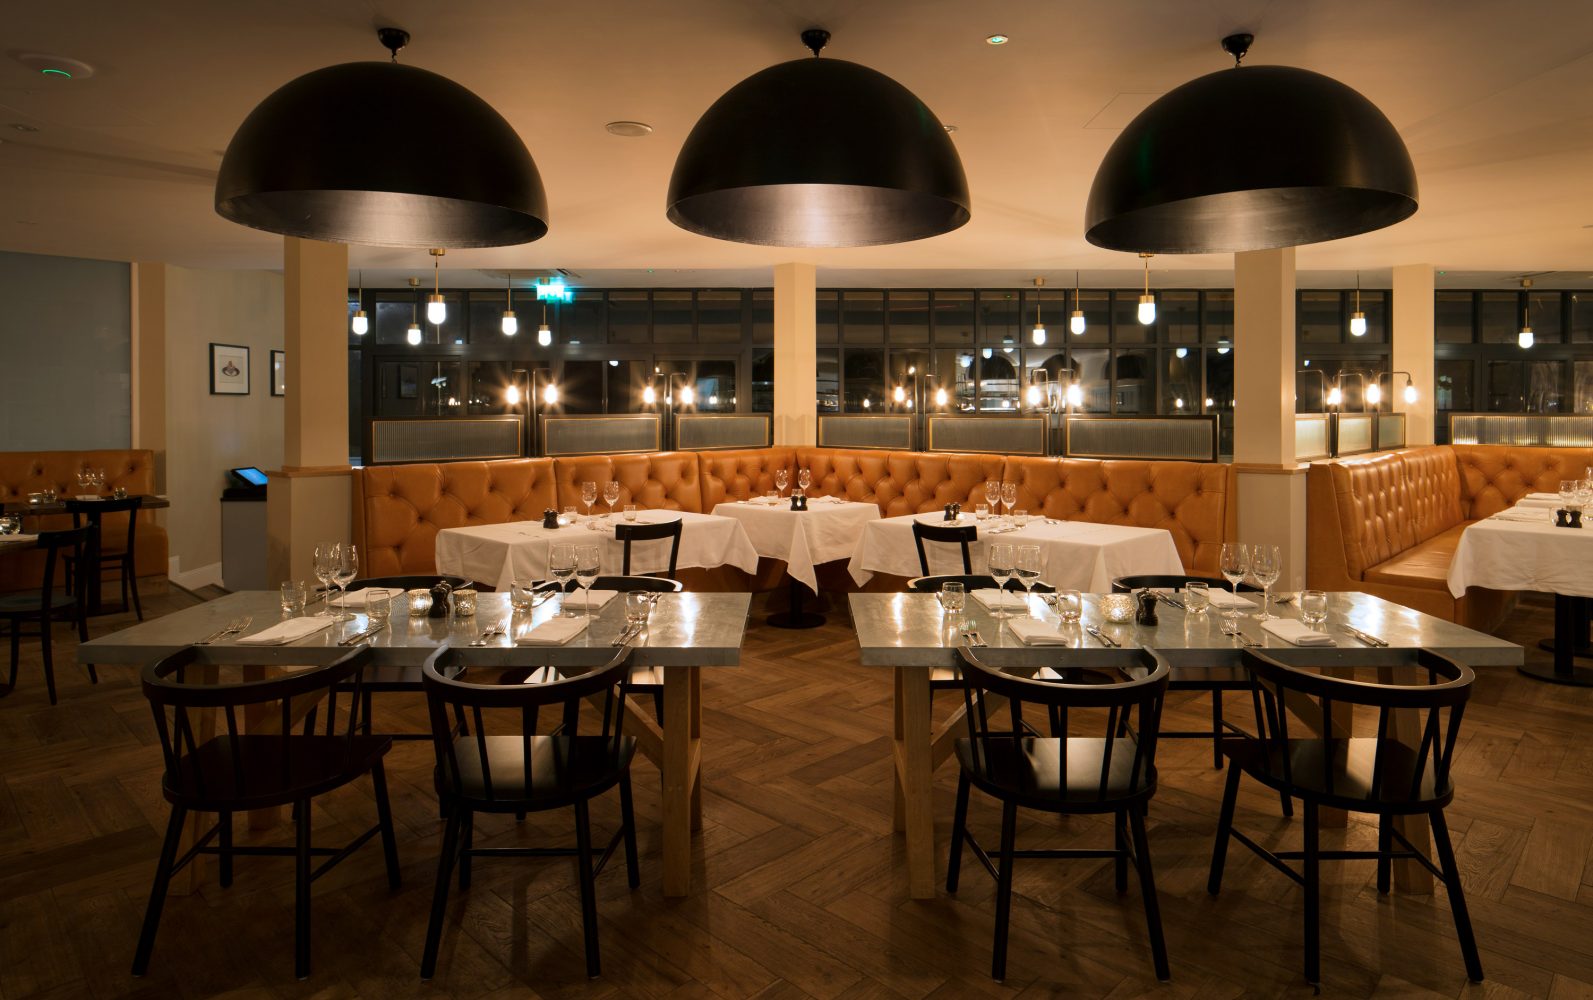 Image of dining space at Zacry’s Watergate Bay Hotel, Restaurant and Bar Design by Household.